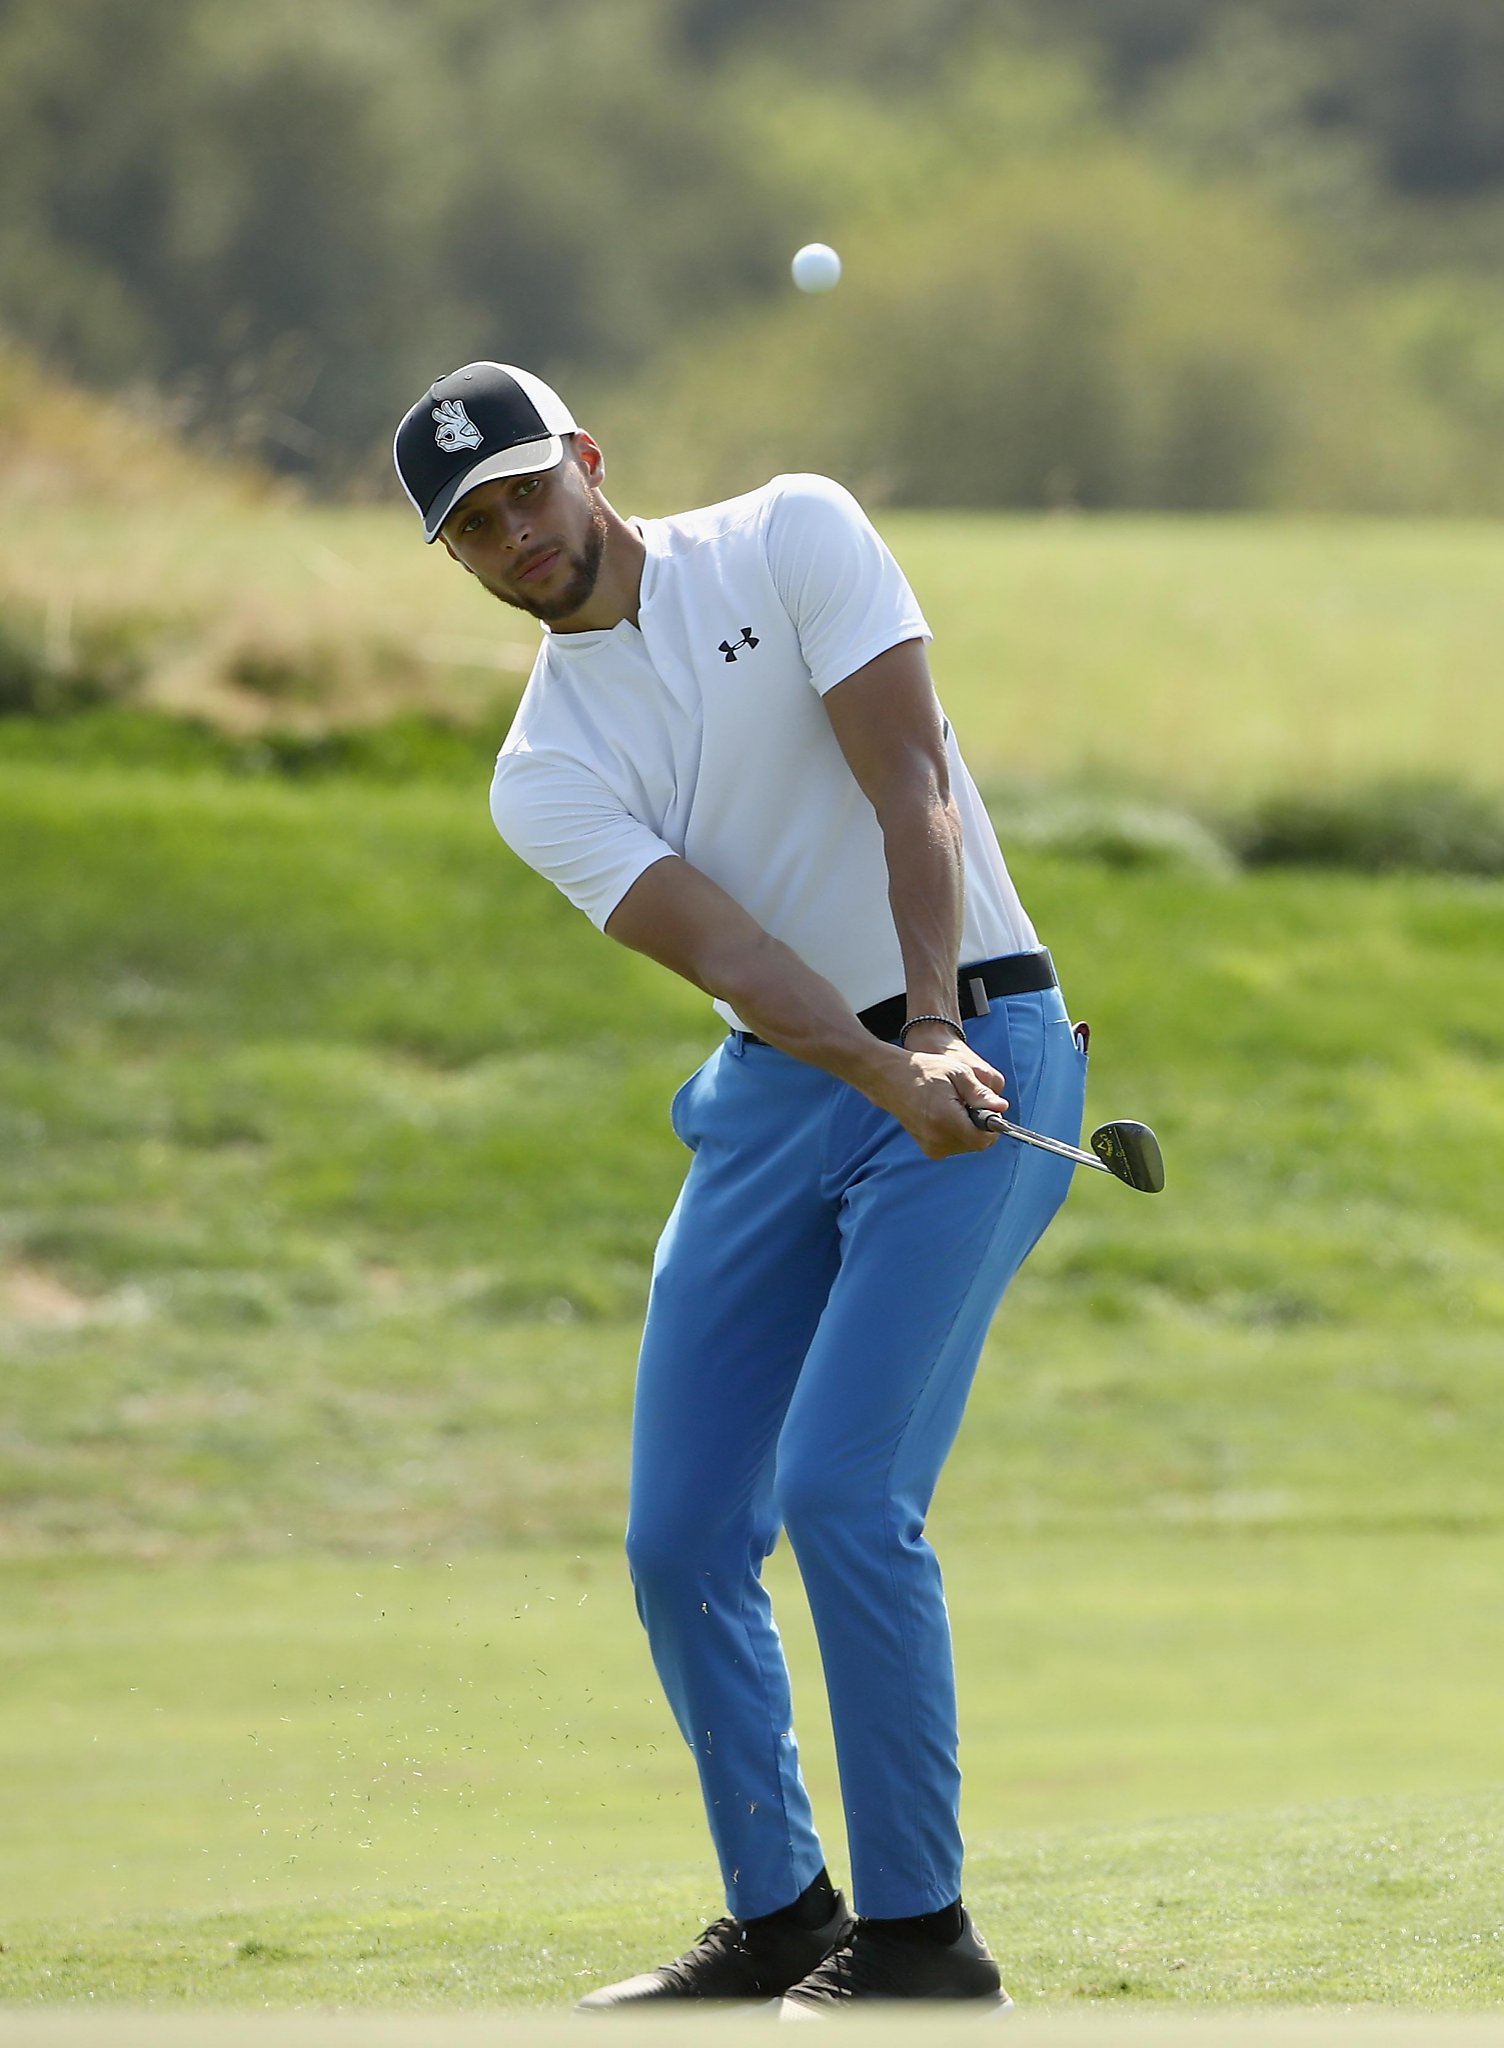 Stephen Curry donates $25,000 to golfer whose wife is battling cancer